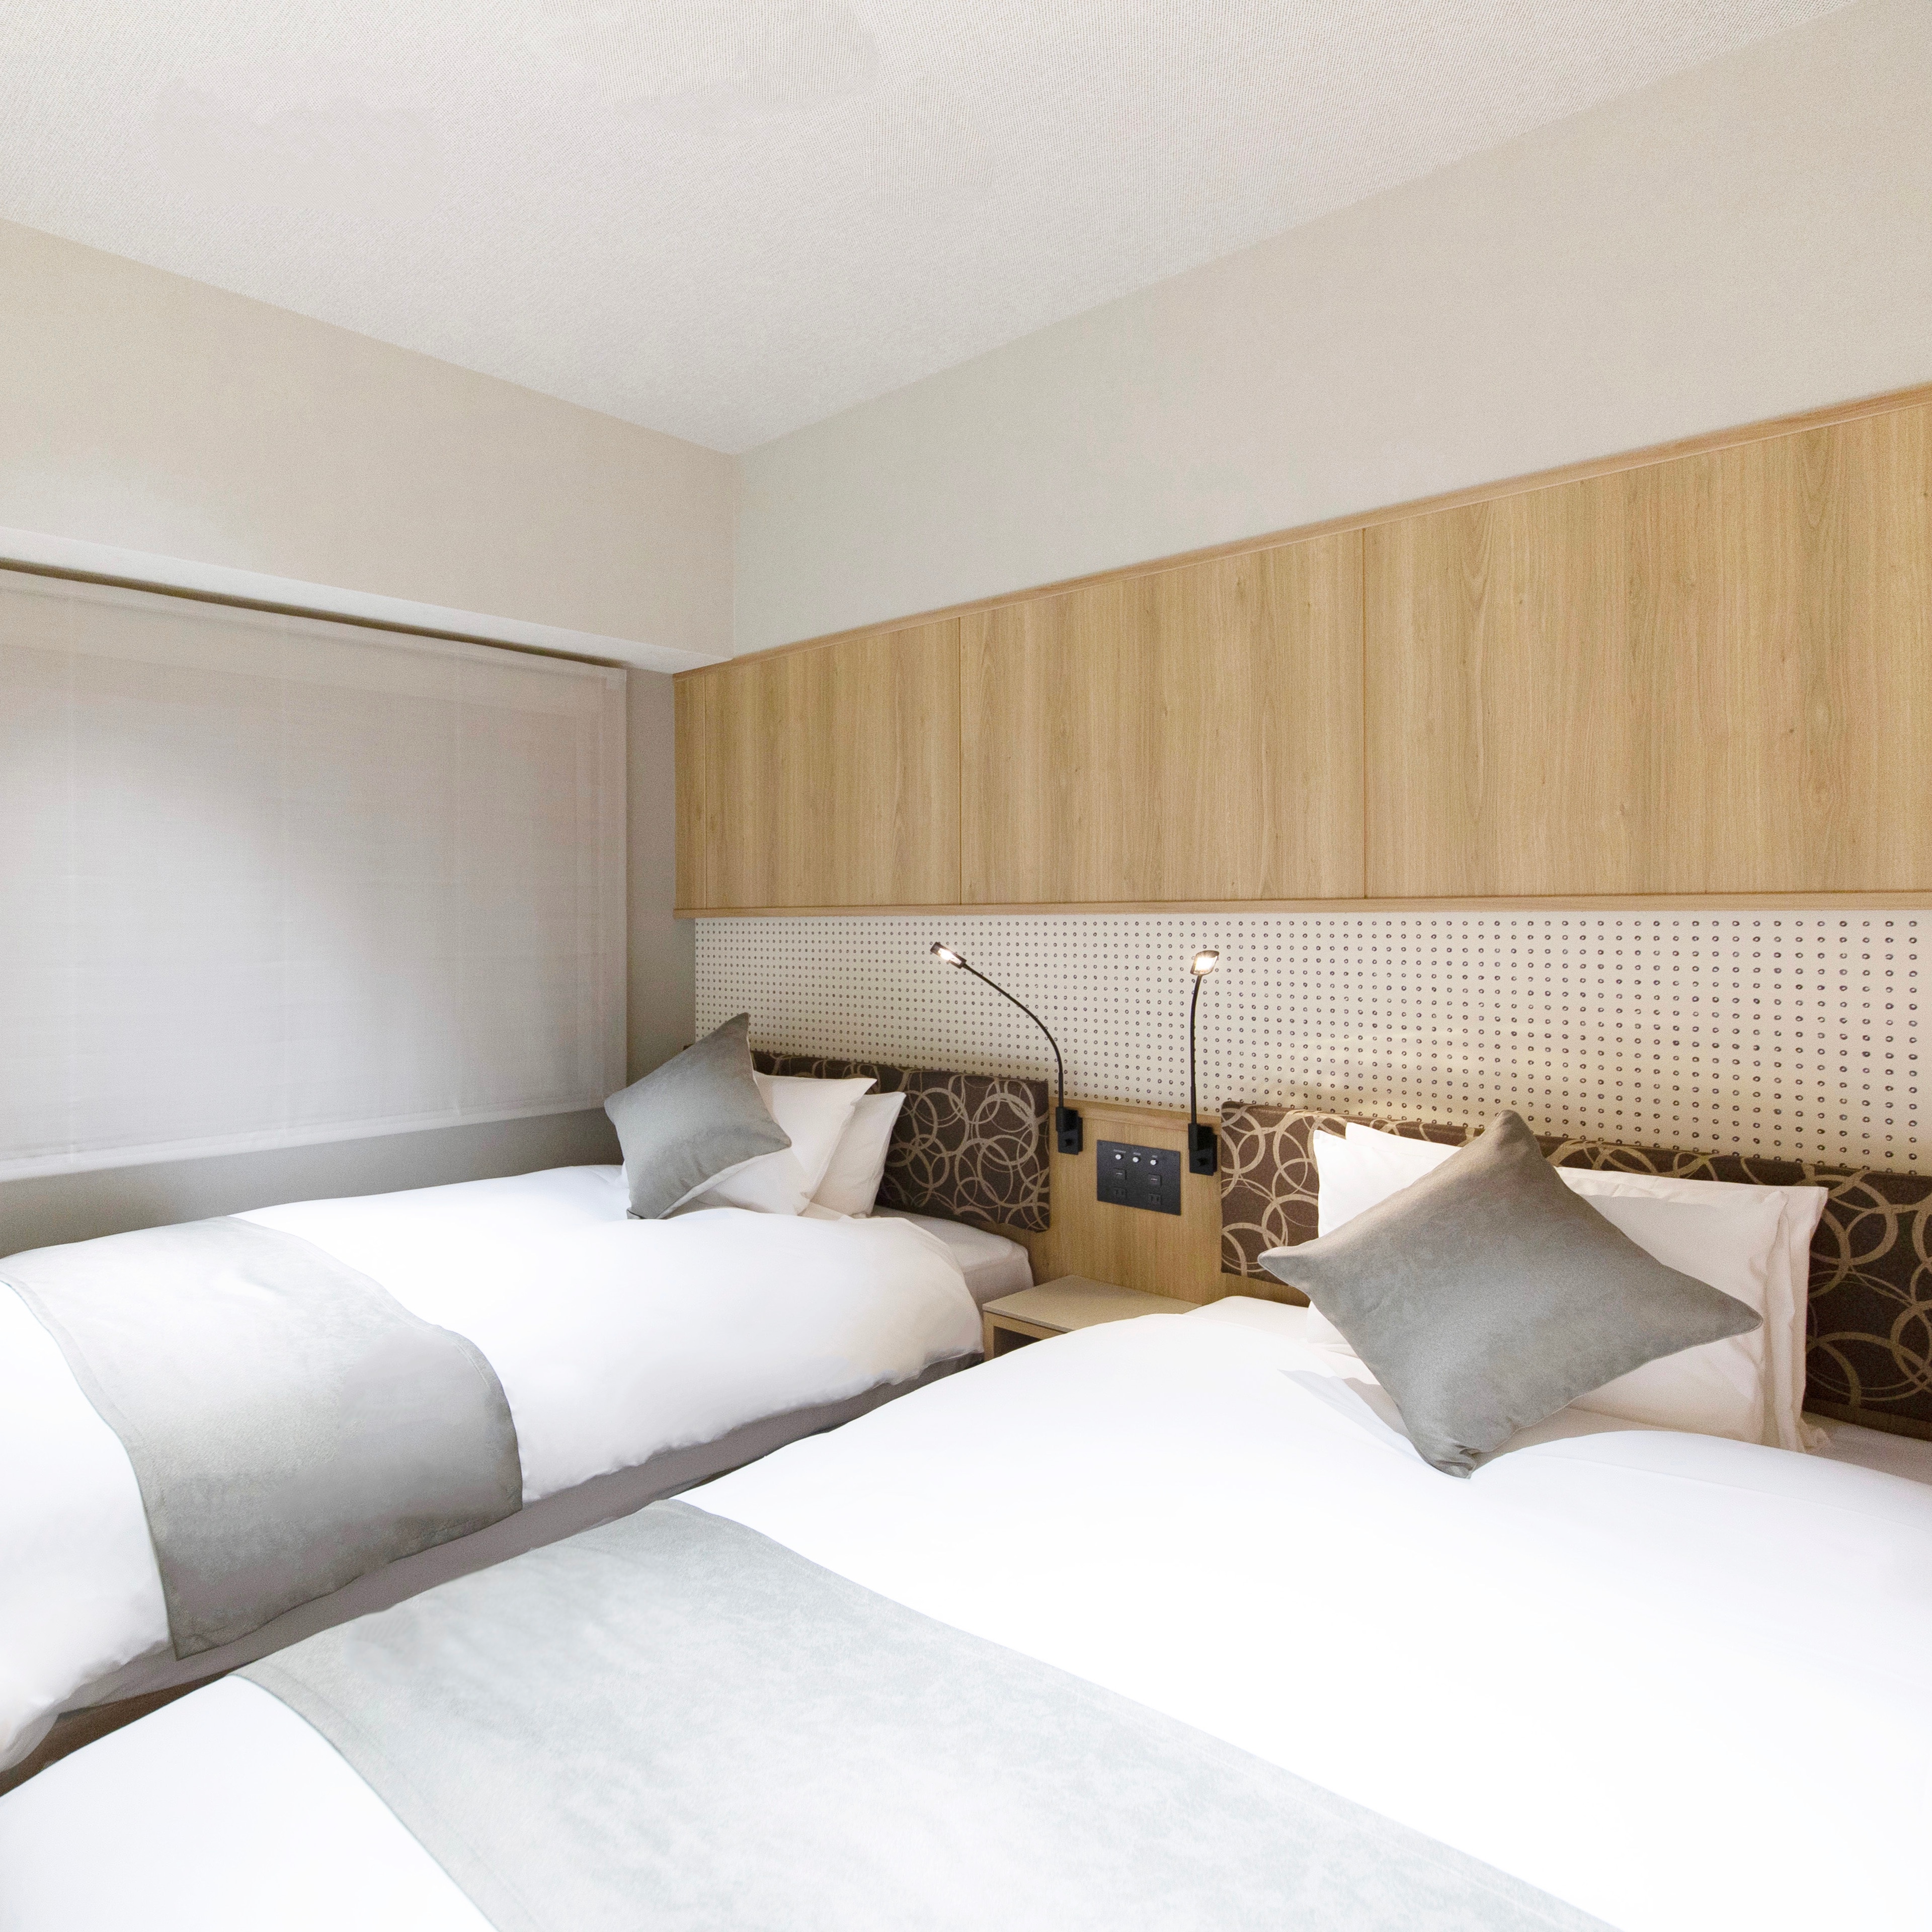 [Guest room] Superior twin room with 2 semi-double beds. Can be used by up to 4 people ♪